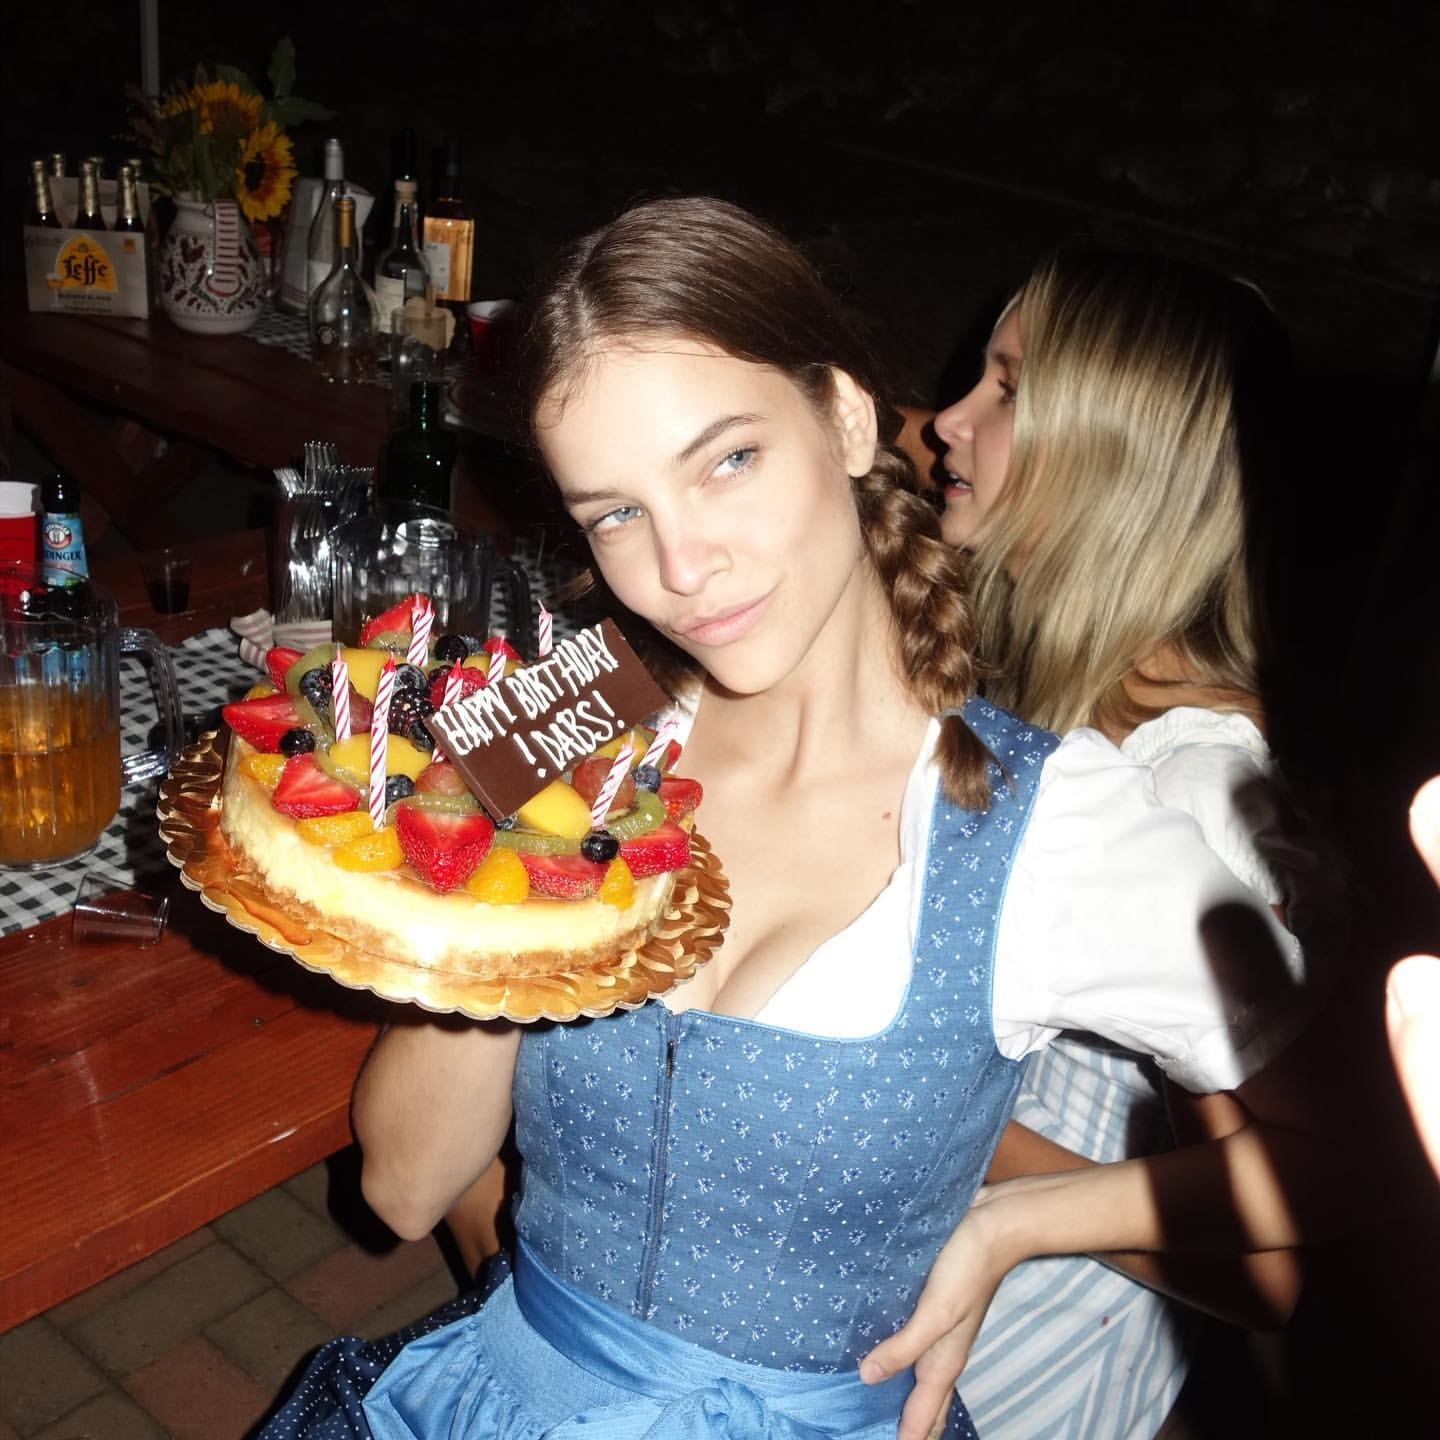 Photos n°16 : Barbara Palvin is Ready for Date Night!